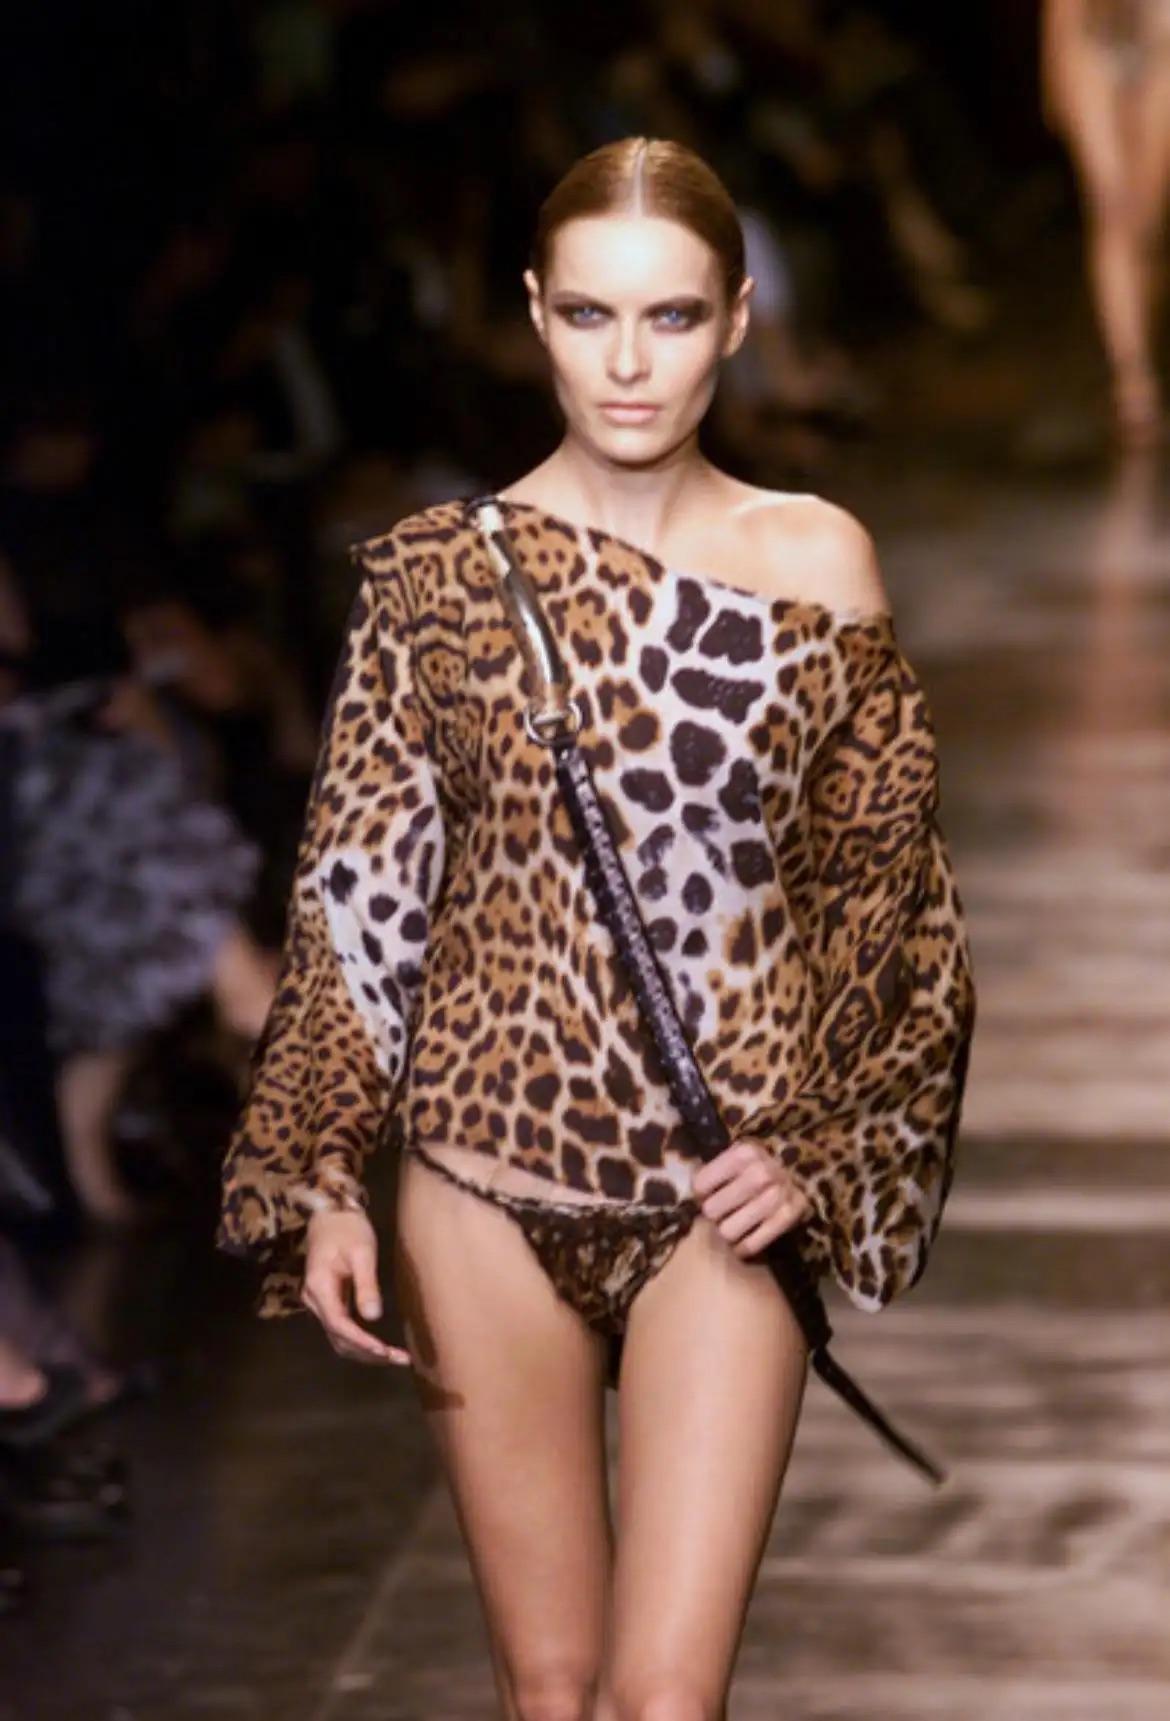 Presenting a stunning cheetah print Yves Saint Laurent top, designed by Tom Ford. From the Spring/Summer 2002 collection, this top debuted as part of look 34 modeled by Rie Rasmussen. Perfectly versatile, this flowy top adds the perfect bold pop to